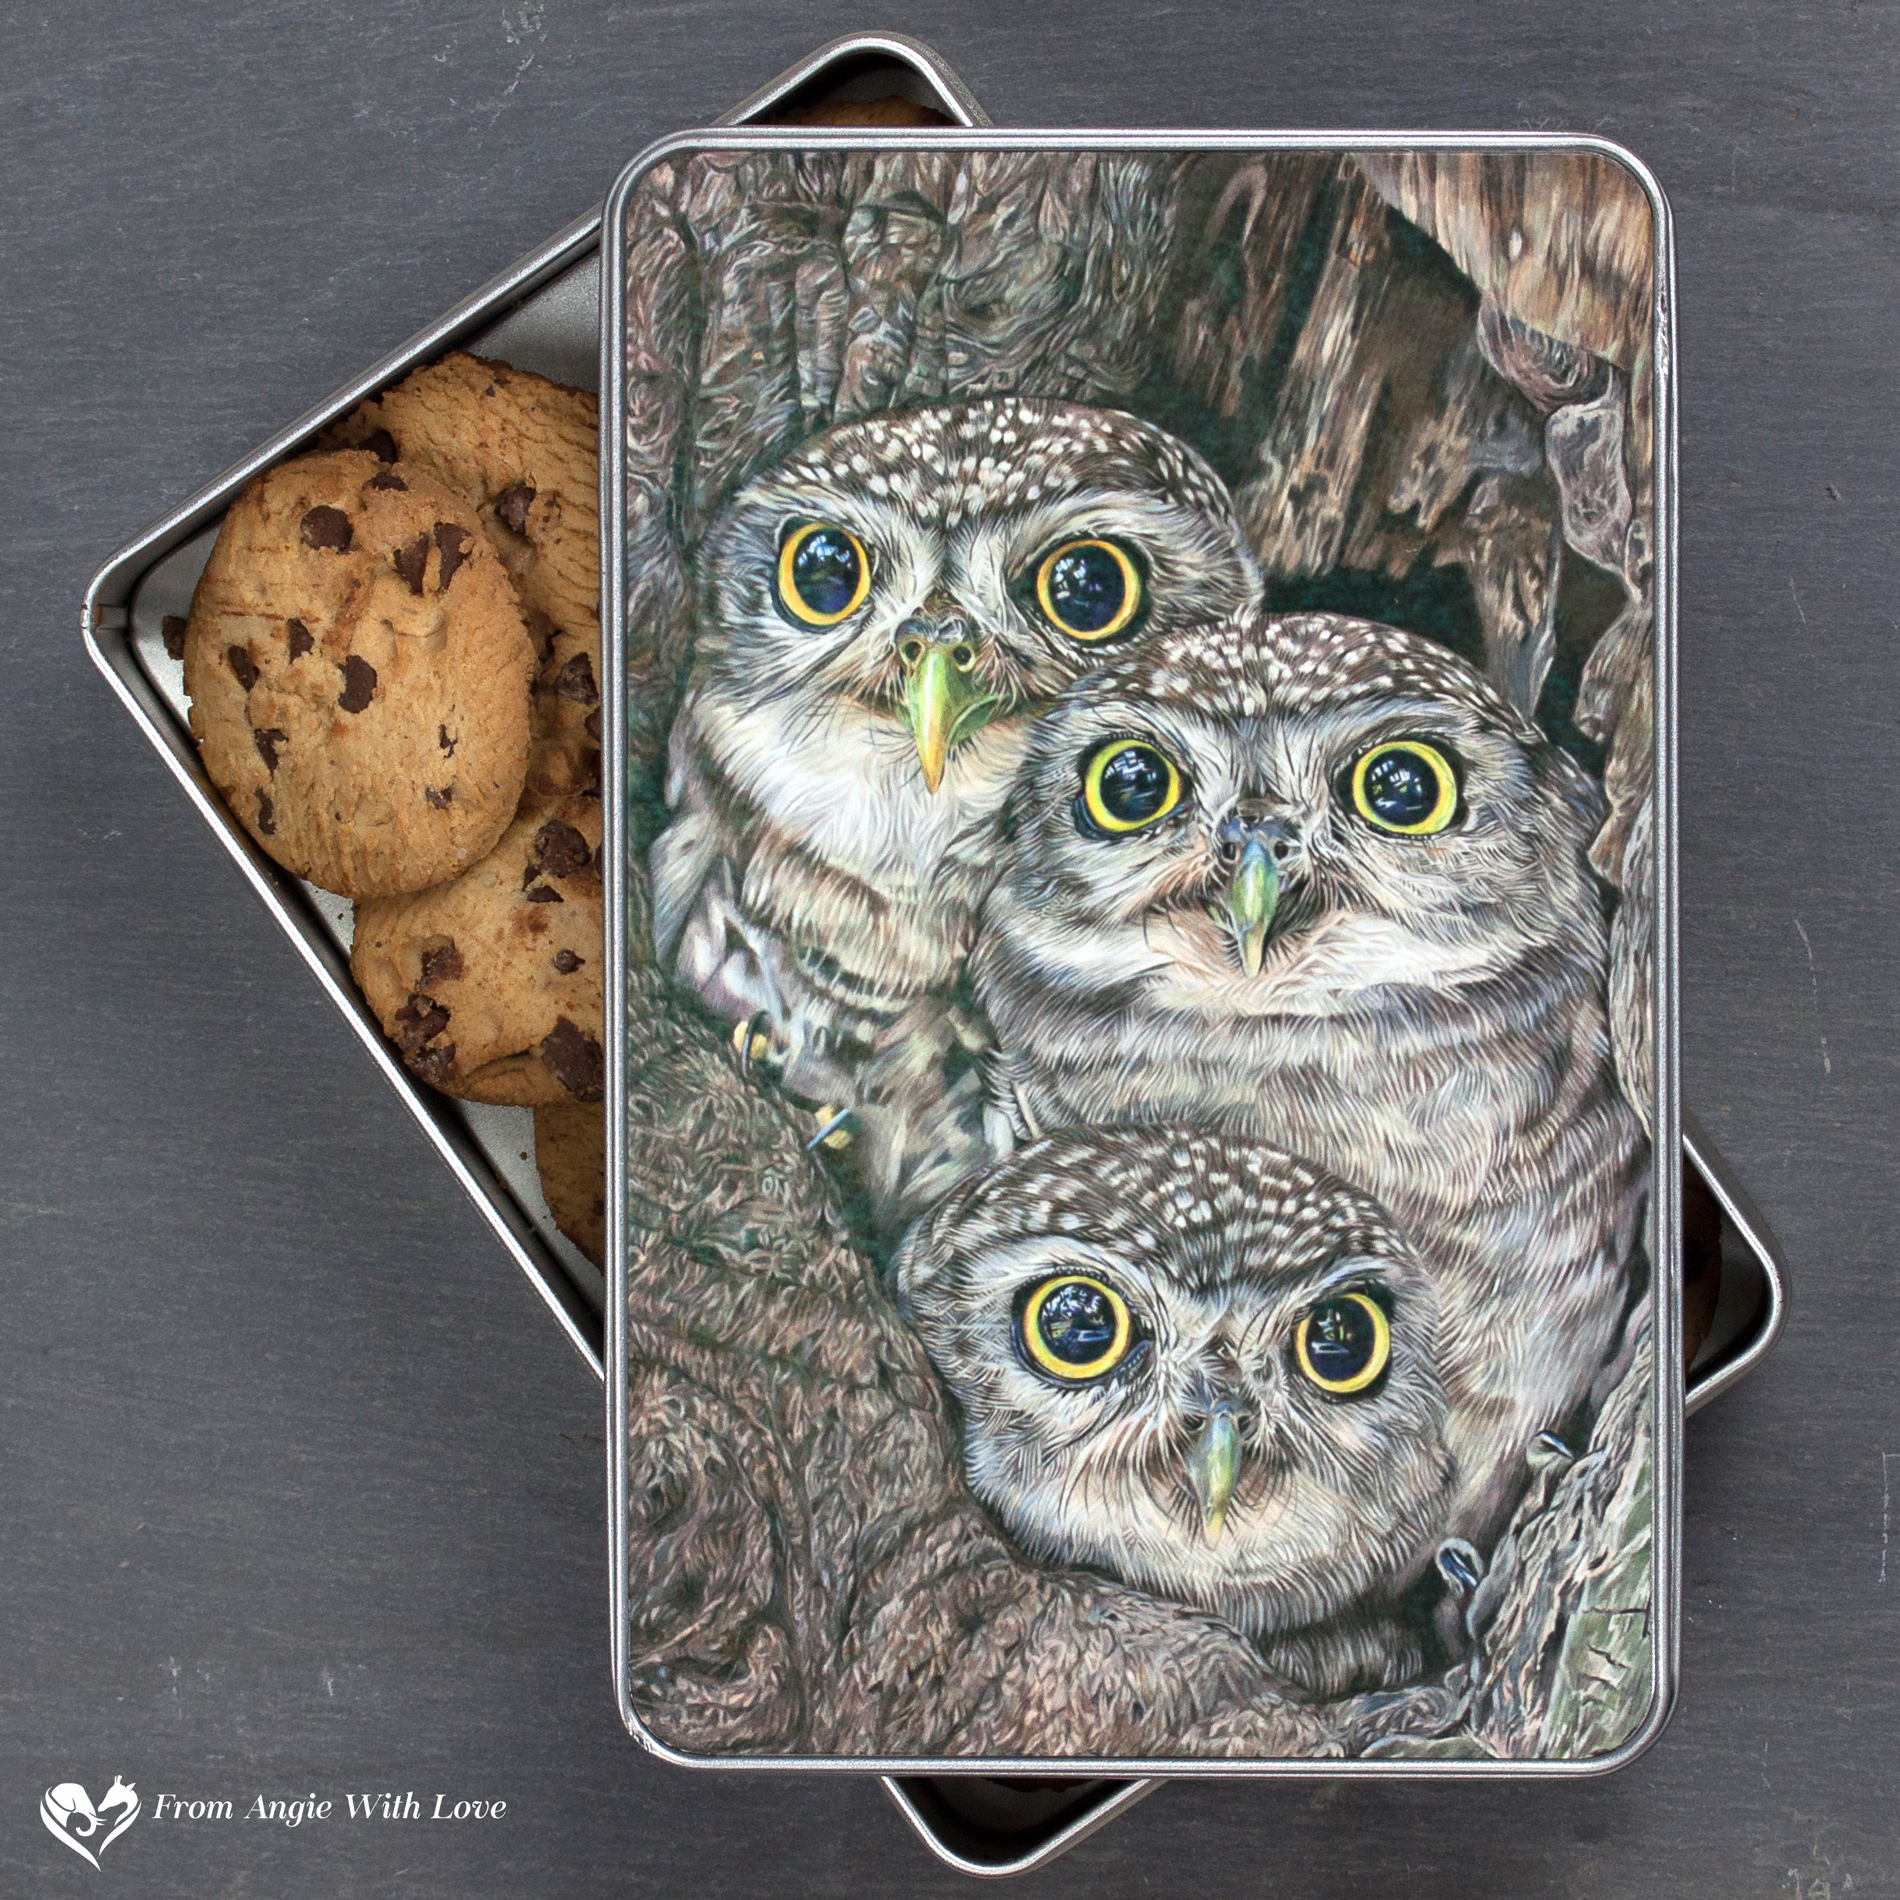 Little Owl Biscuit Tin - Fledging Day